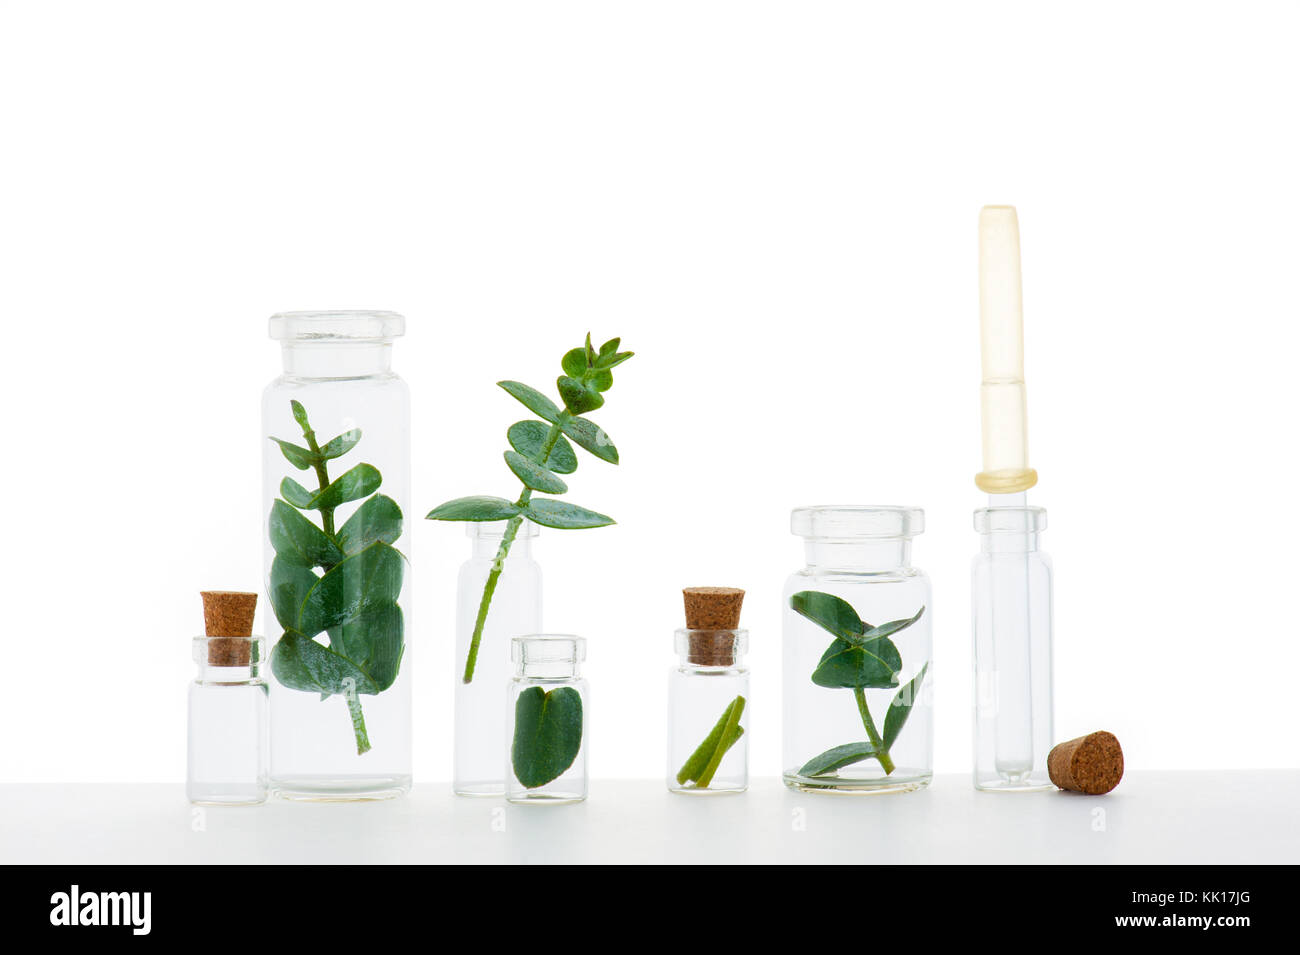 Branches of plants in the medicine bottles on the white background Stock Photo